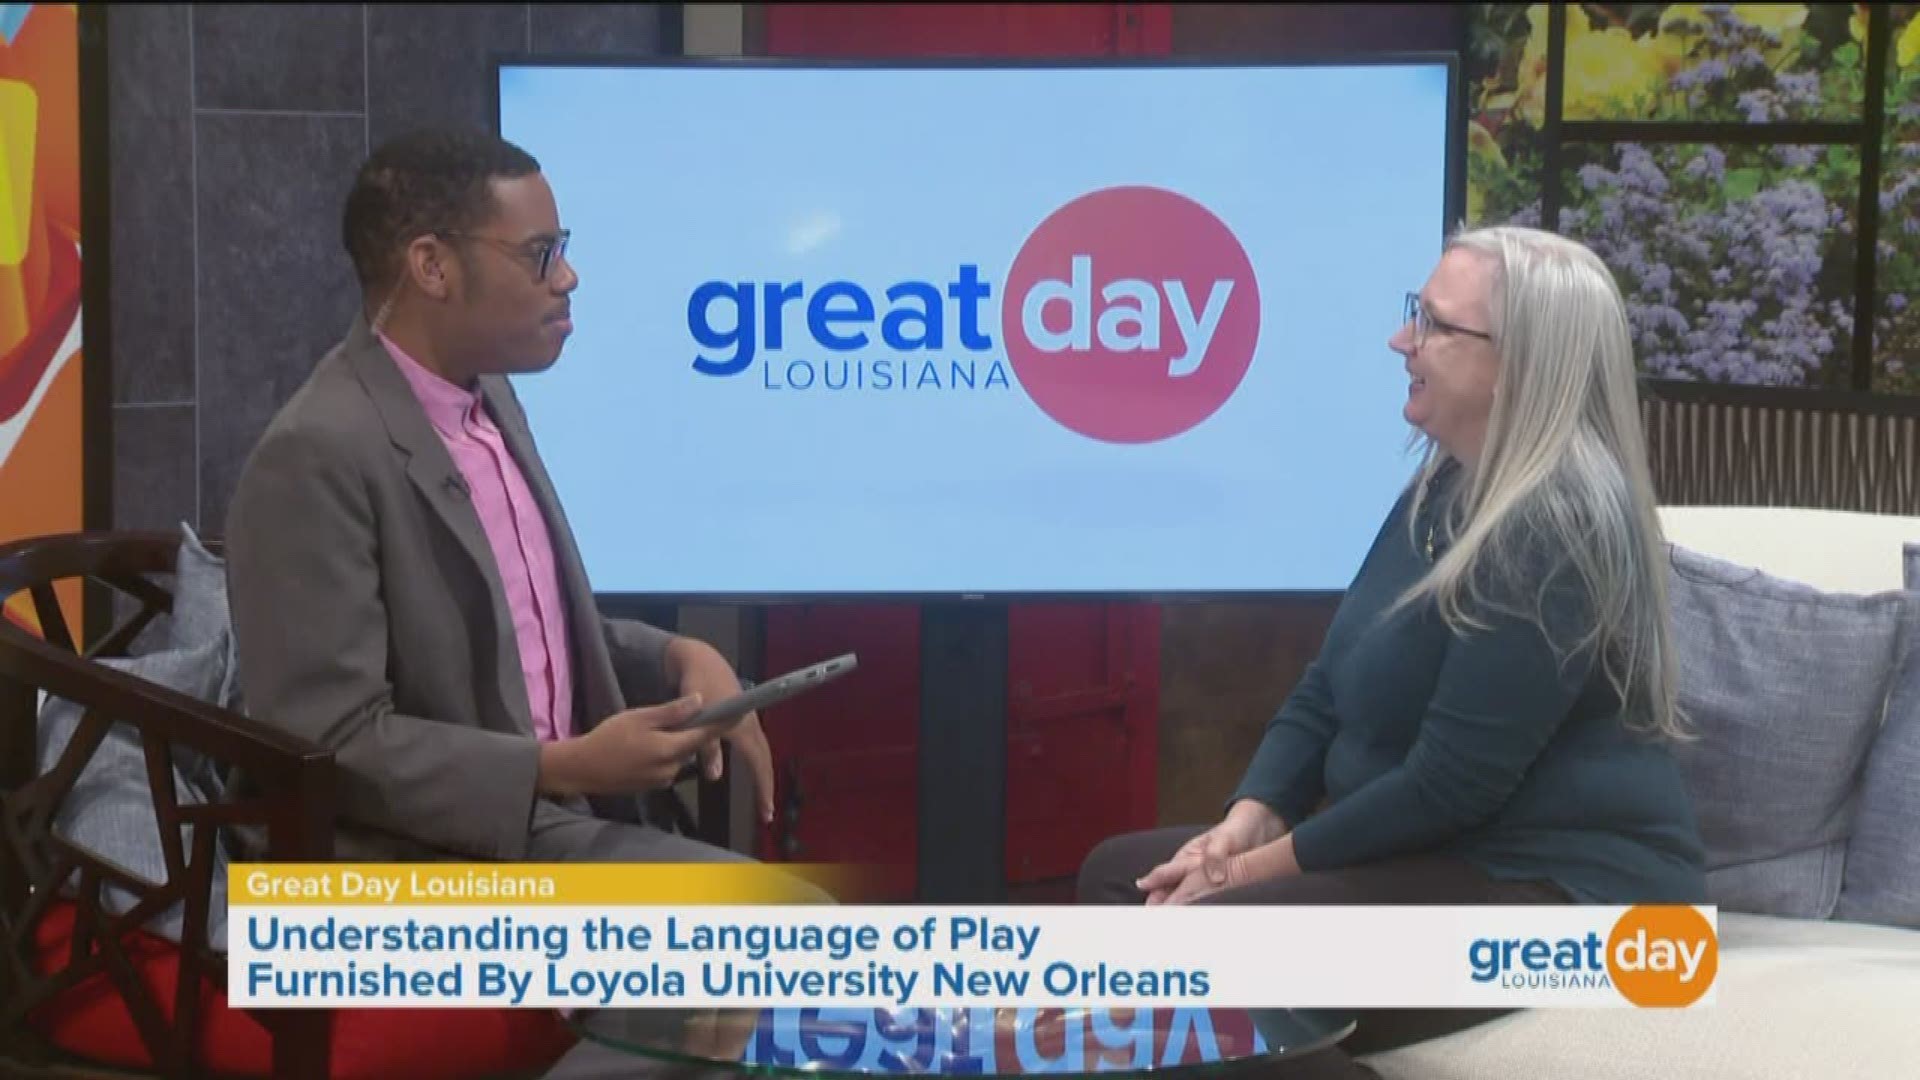 Dr. LeeAnne Steen with the Loyola University Play Therapy Center stopped by to discuss the benefits of play therapy.